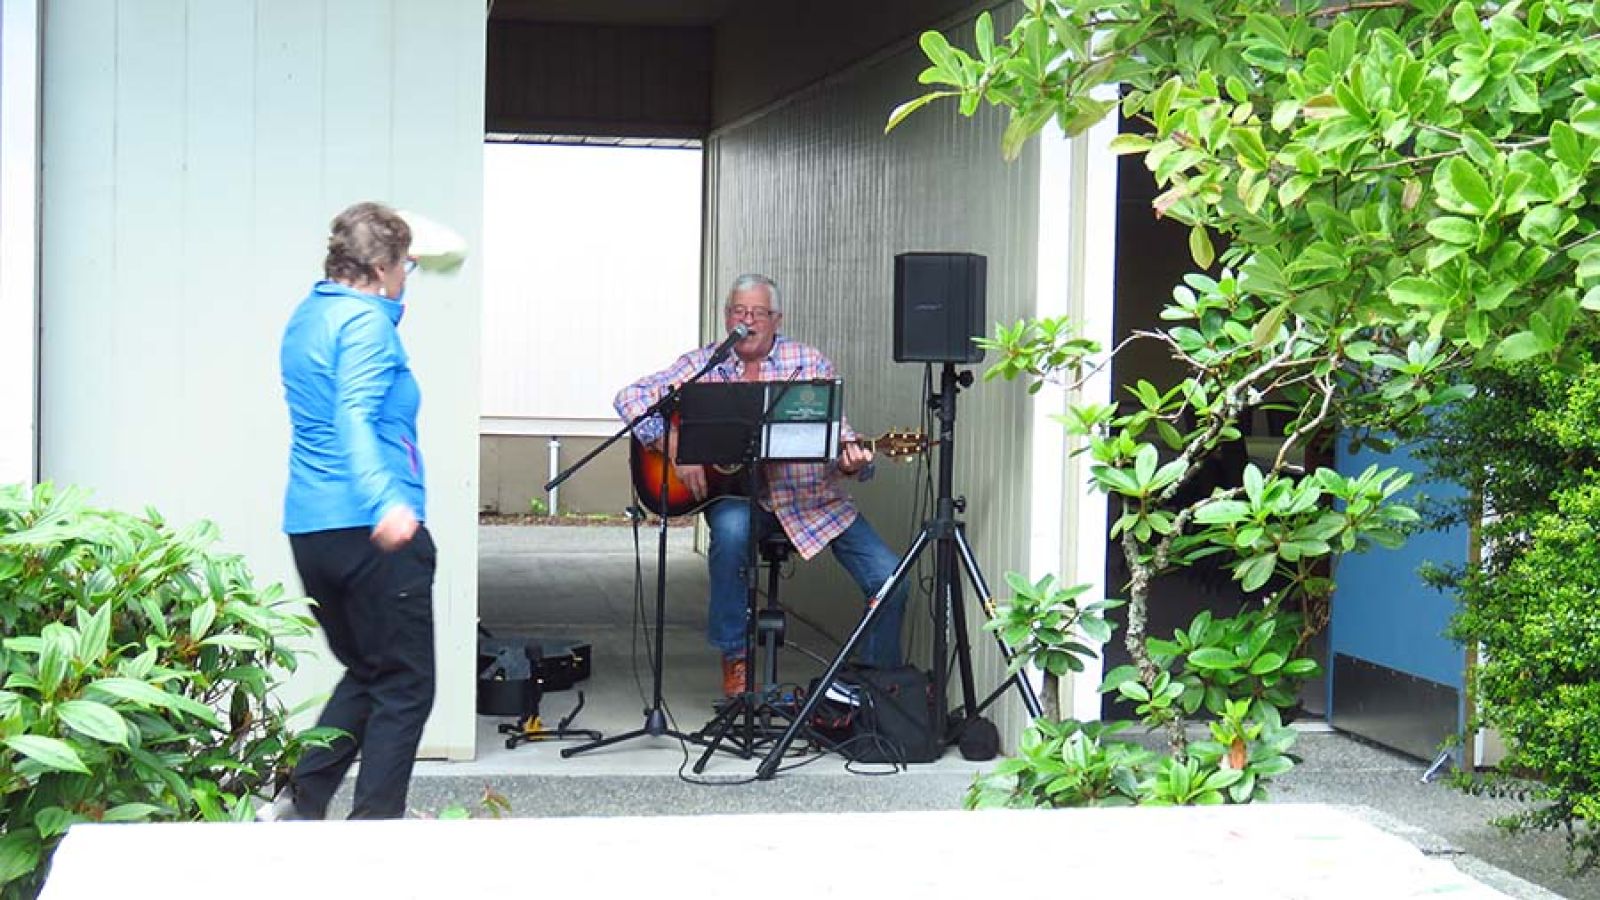 Outdoor concert at Parksville Community Centre